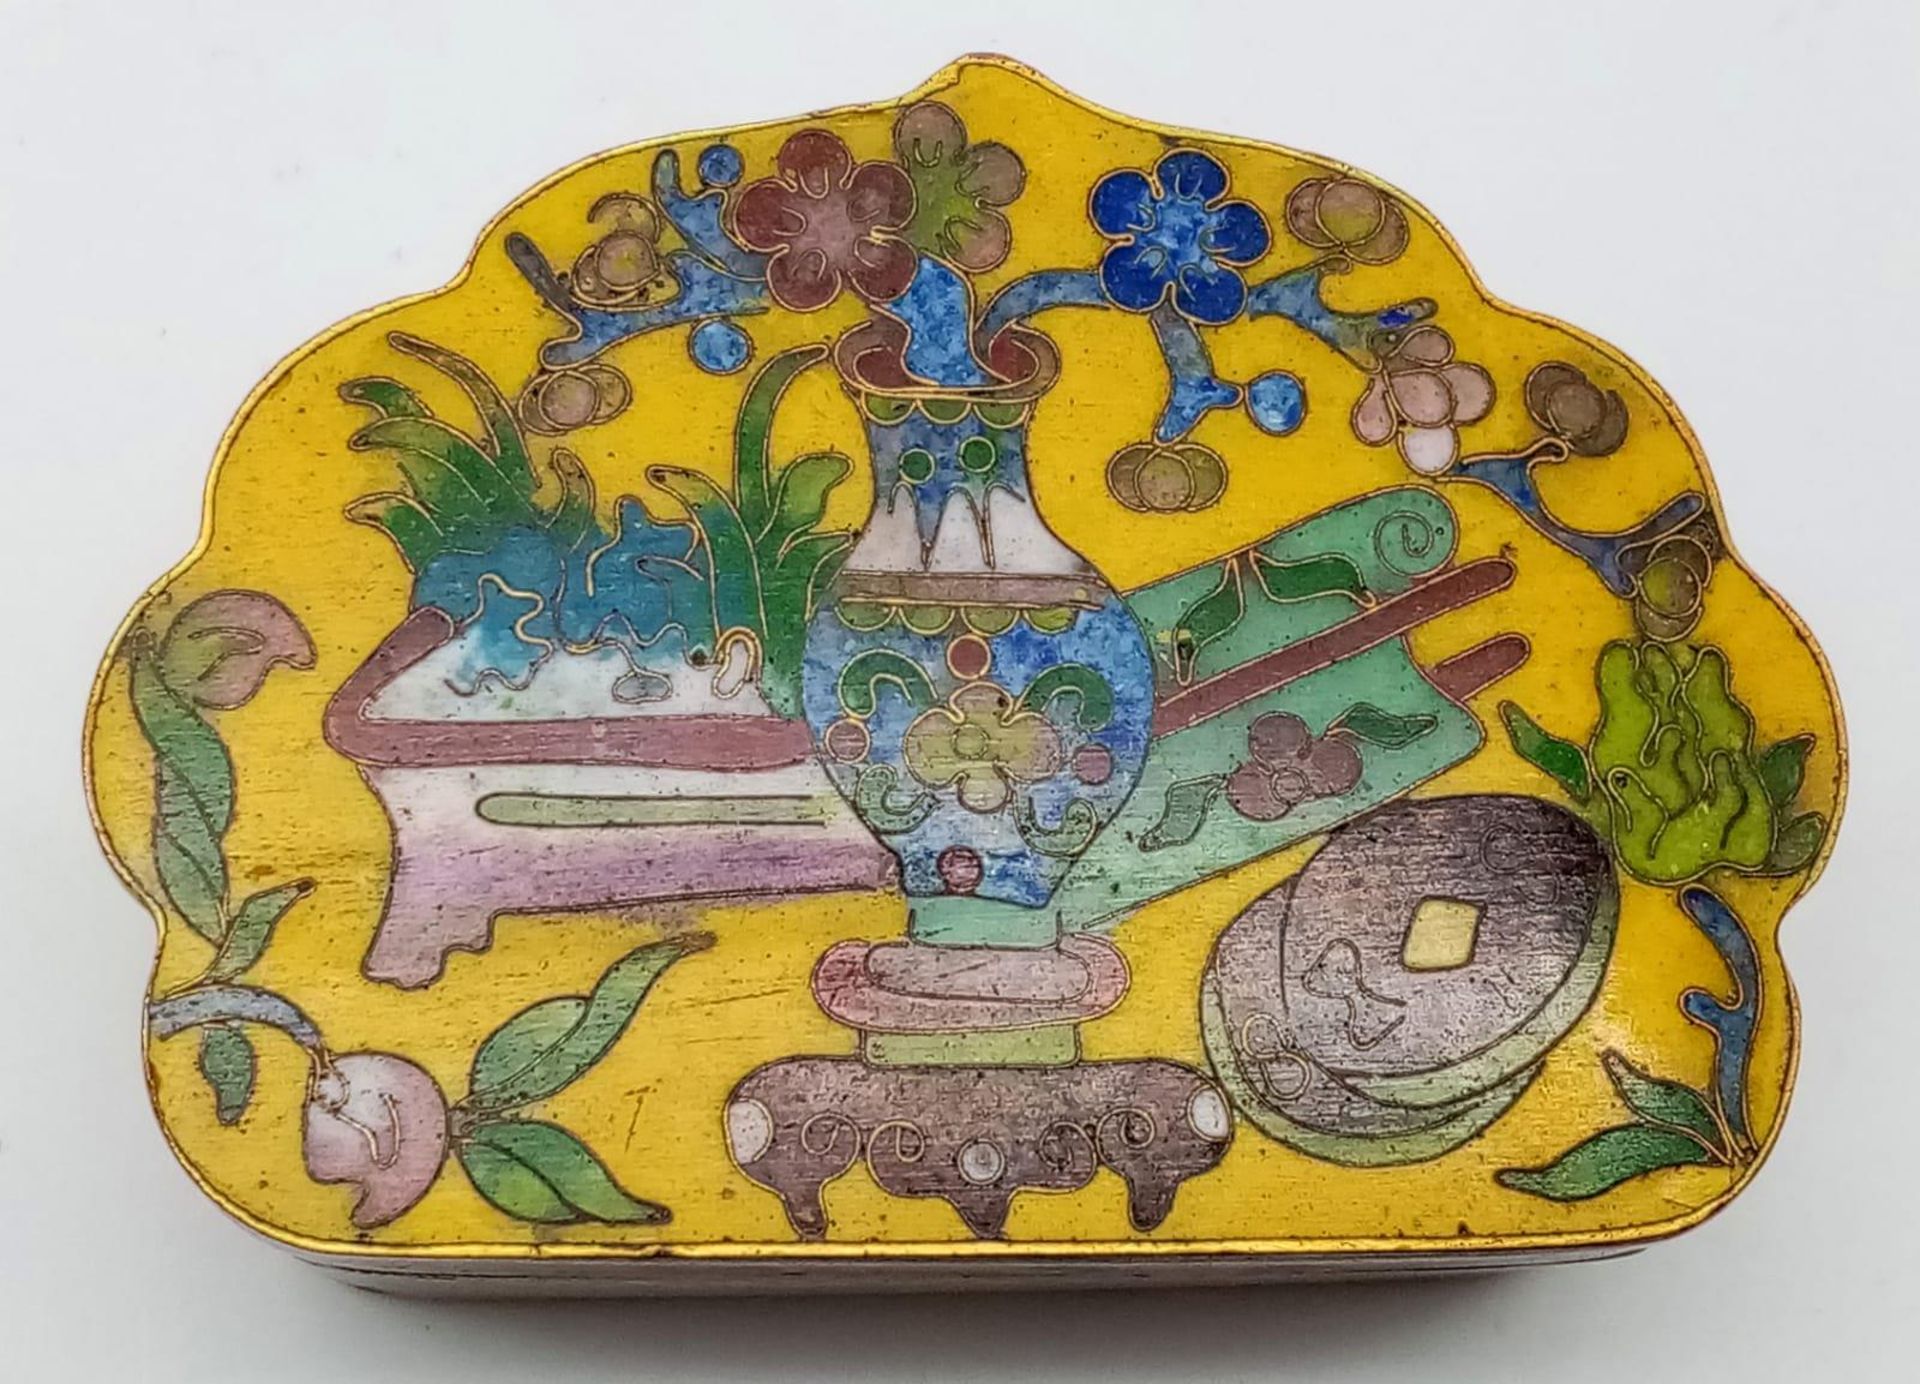 AN EXQUISITE EXAMPLE OF 19TH CENTURY CHINESE CLOISONNE WORK IN THE FORM OF A SMALL TRINKET BOX . - Image 3 of 6